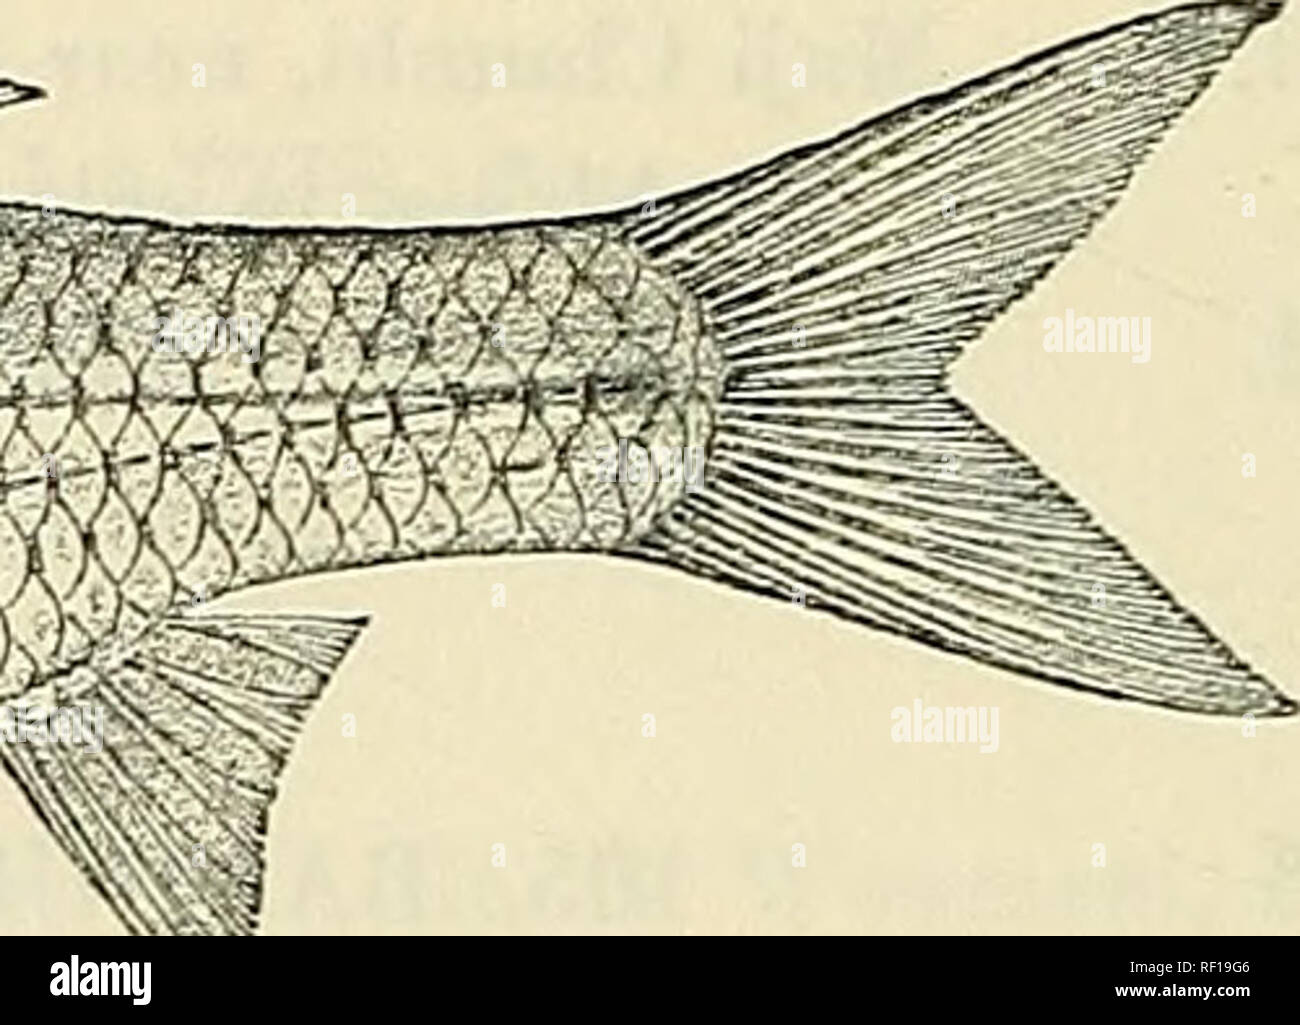 . Catalogue of the fresh-water fishes of Africa in the British Museum (Natural History). British Museum (Natural History); Fishes; Freshwater animals. 1 wmmH&amp;m^Mmm^. Barbtis Jiamiltonii, Type (Ann. S. Afr. Mus.). §. 106 b. BARBUS BROOKINGII. Gilchrist &amp; Thompson, 1. c. fig. Depth of body 3| times in total length, length of head 4 times. Snout blunt, 3f times in length of head ; eye 4^ times in length of head, interorbital width 3 J times; mouth small, subinferior, its width 3f times in length of head; lips thick, lower cleft in centre and jaw sharp-edged ; two barbels on each side, ant Stock Photo